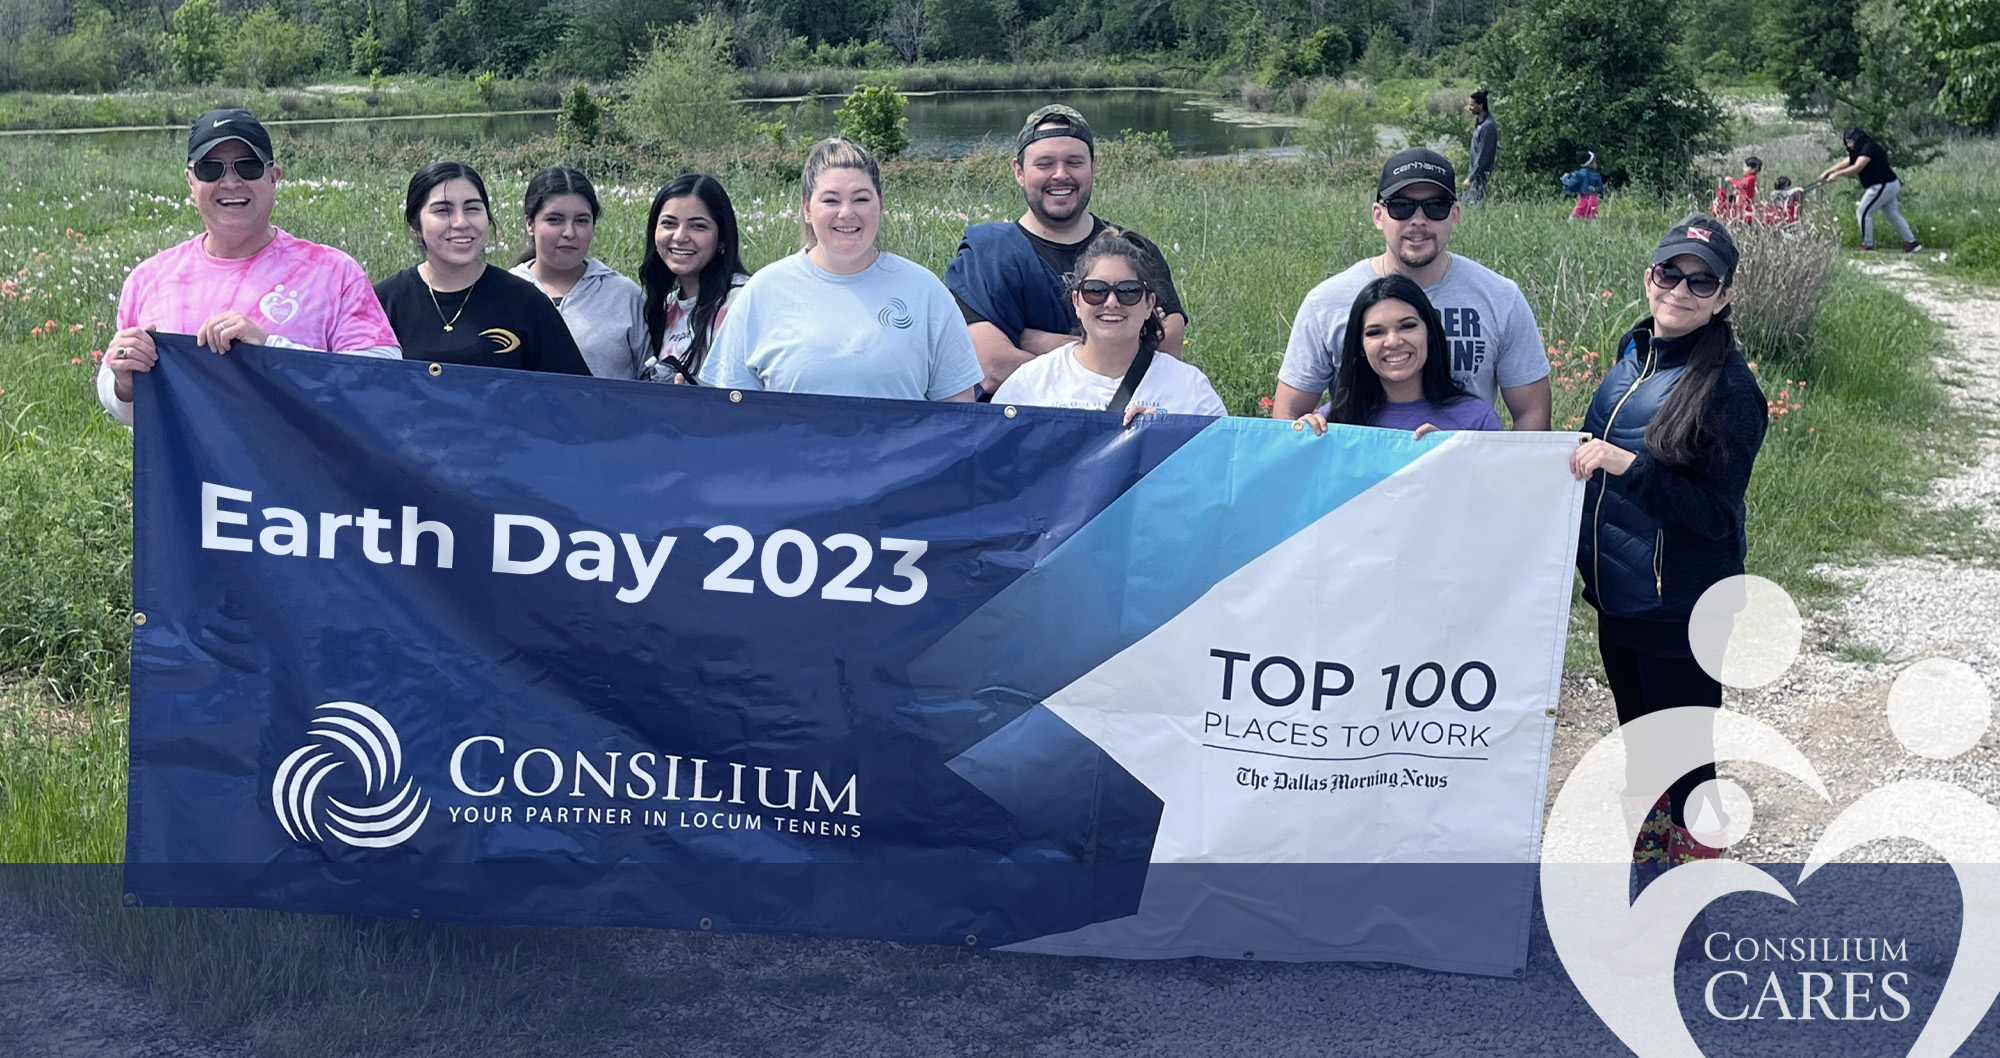 A team from Consilium posing with an earth day flag.